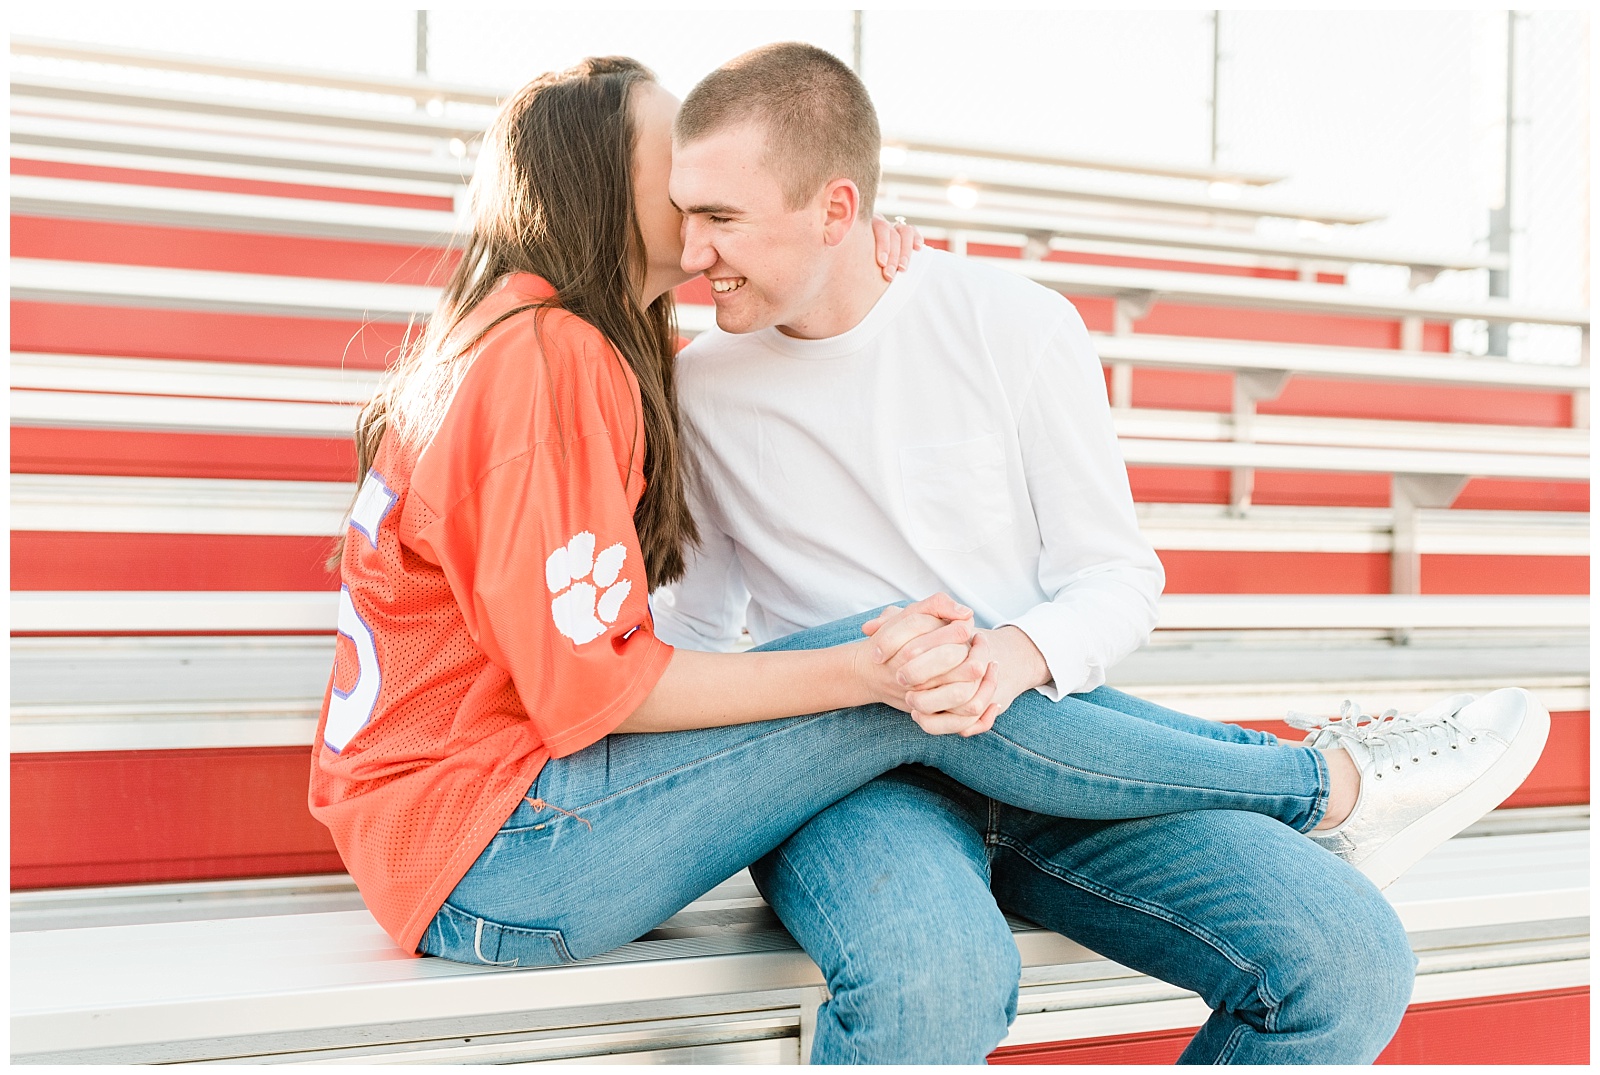 New Jersey, Engagement Session, Wedding Photographer, NFL, Coach, LA Chargers, Football, Athletic, Sporty, Jersey, Bleachers,